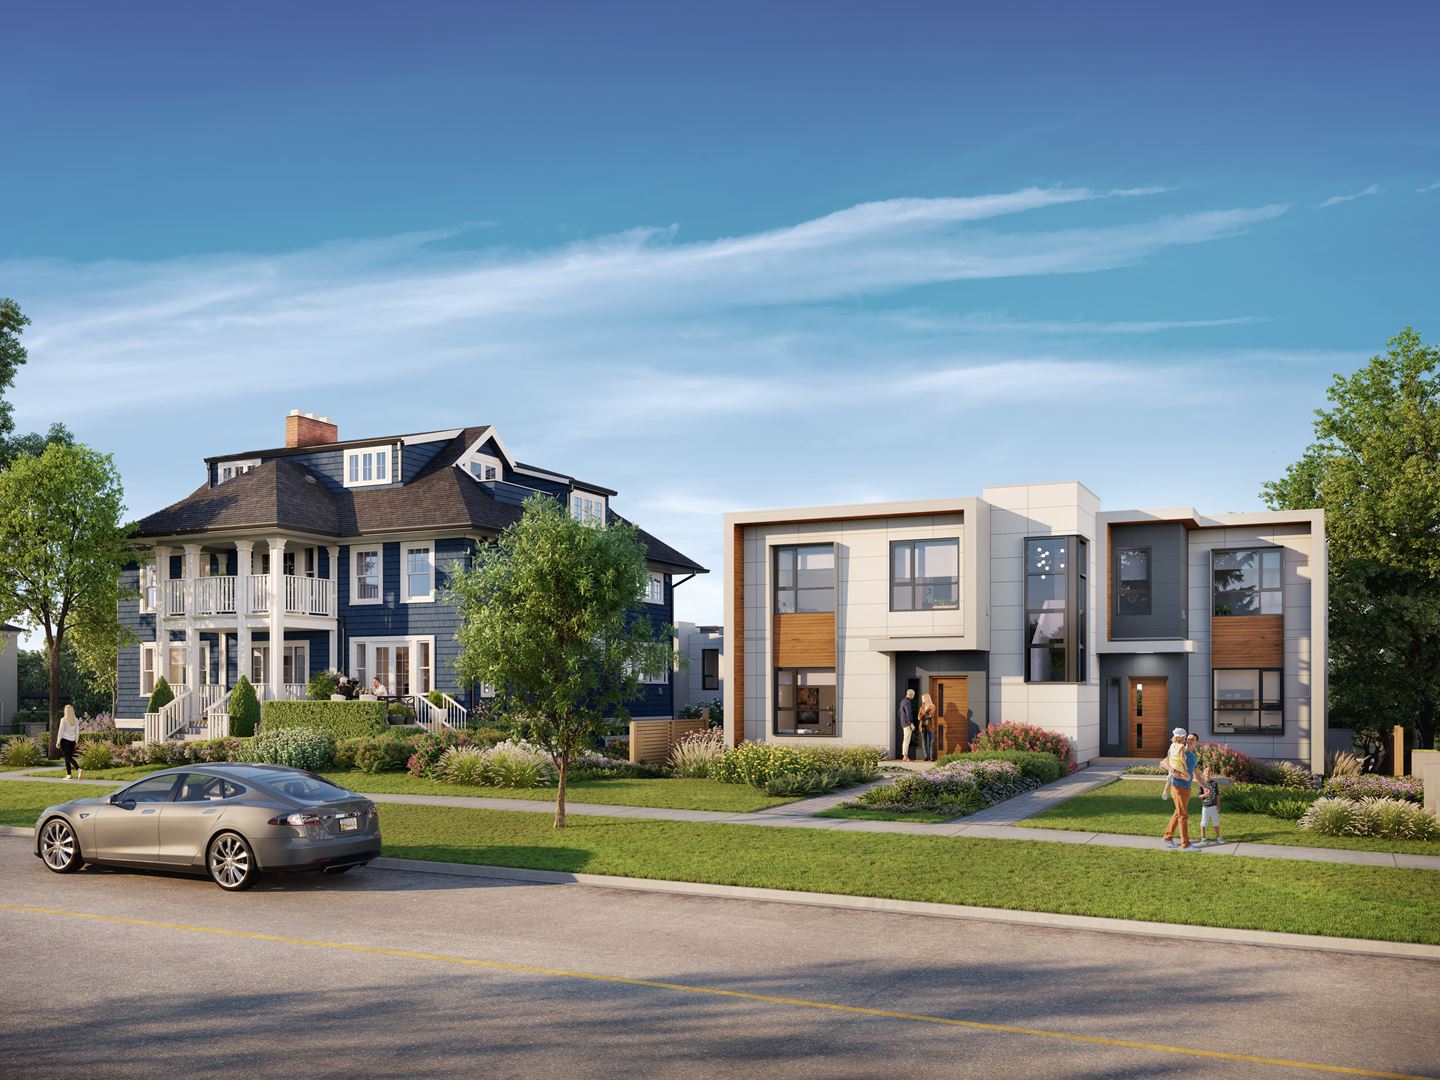 A luxury collection of eight residences consisting of a repurposed heritage home, townhomes, and a duplex.